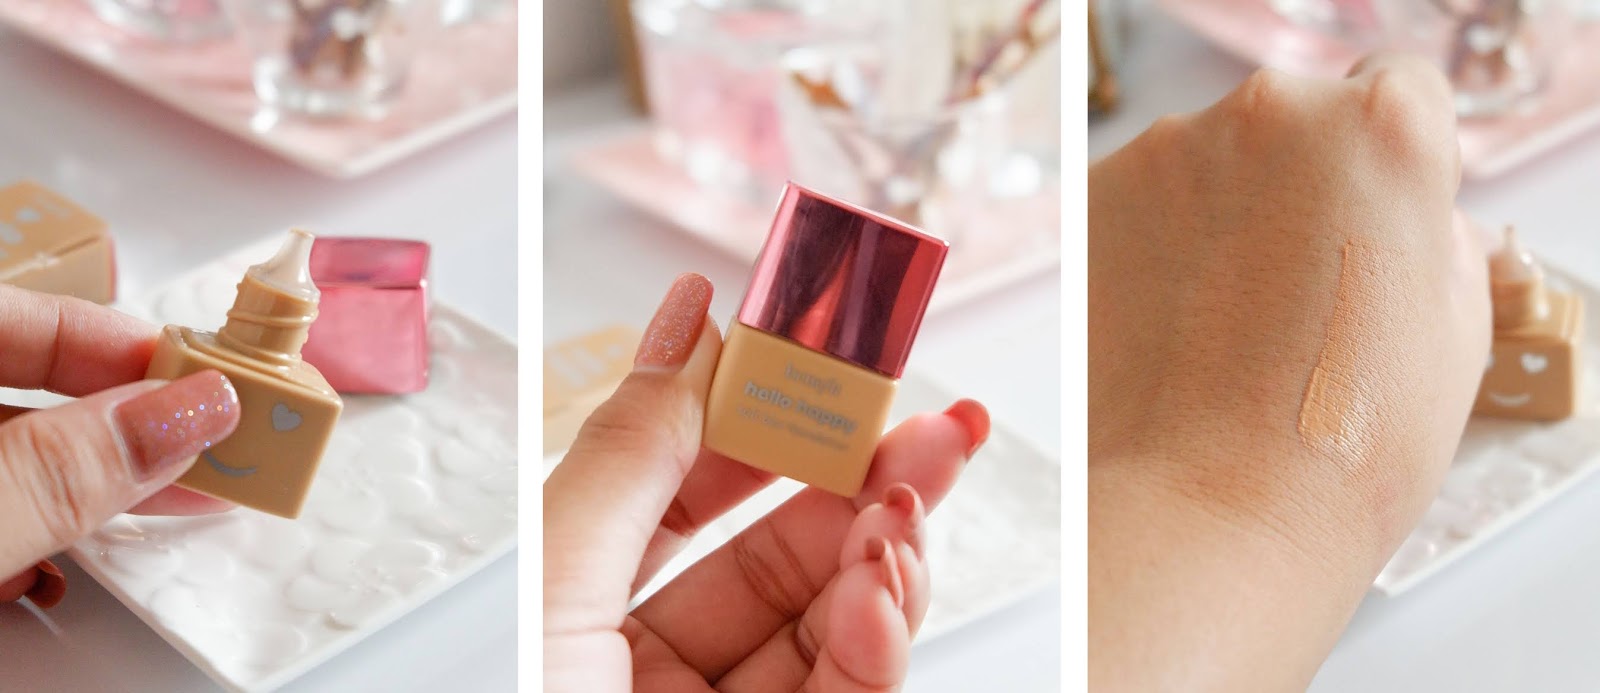 BENEFIT COSMETICS: HELLO HAPPY SOFT BLUR FOUNDATION REVIEW 